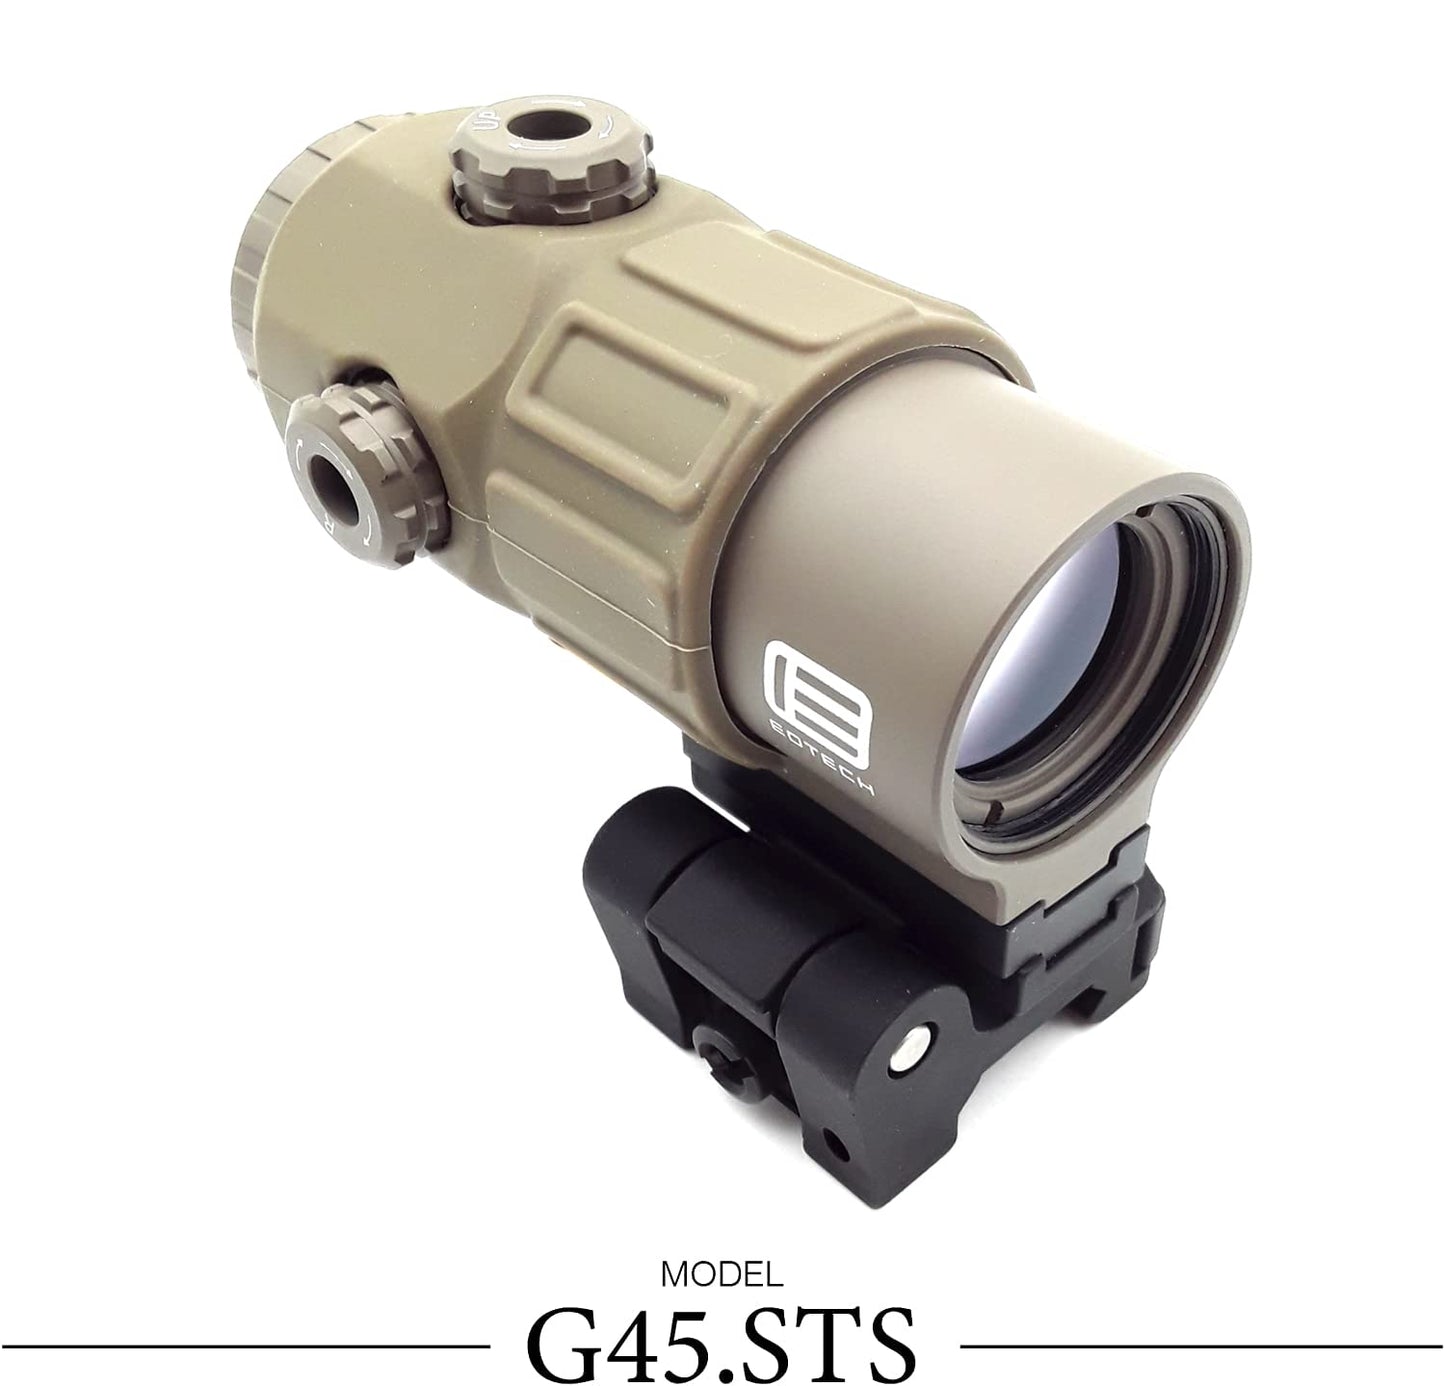 EOTECH 5 power magnifer with quick disconnect, switch to side (STS) mount  - G45.STSTAN